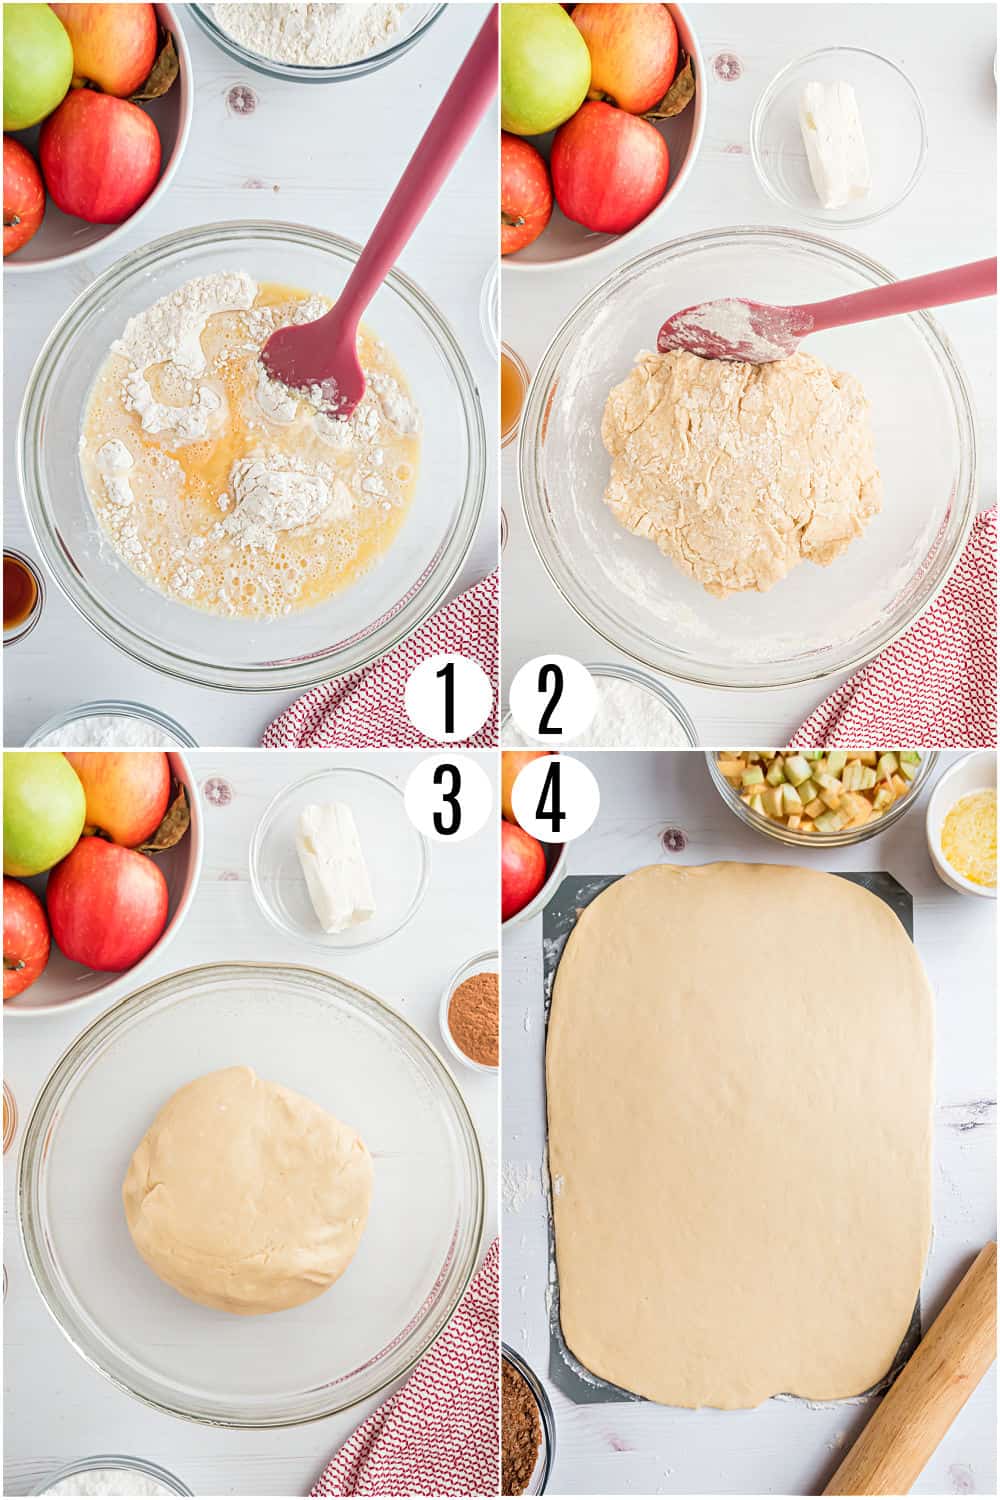 Step by step photos showing how to make apple cinnamon roll dough.